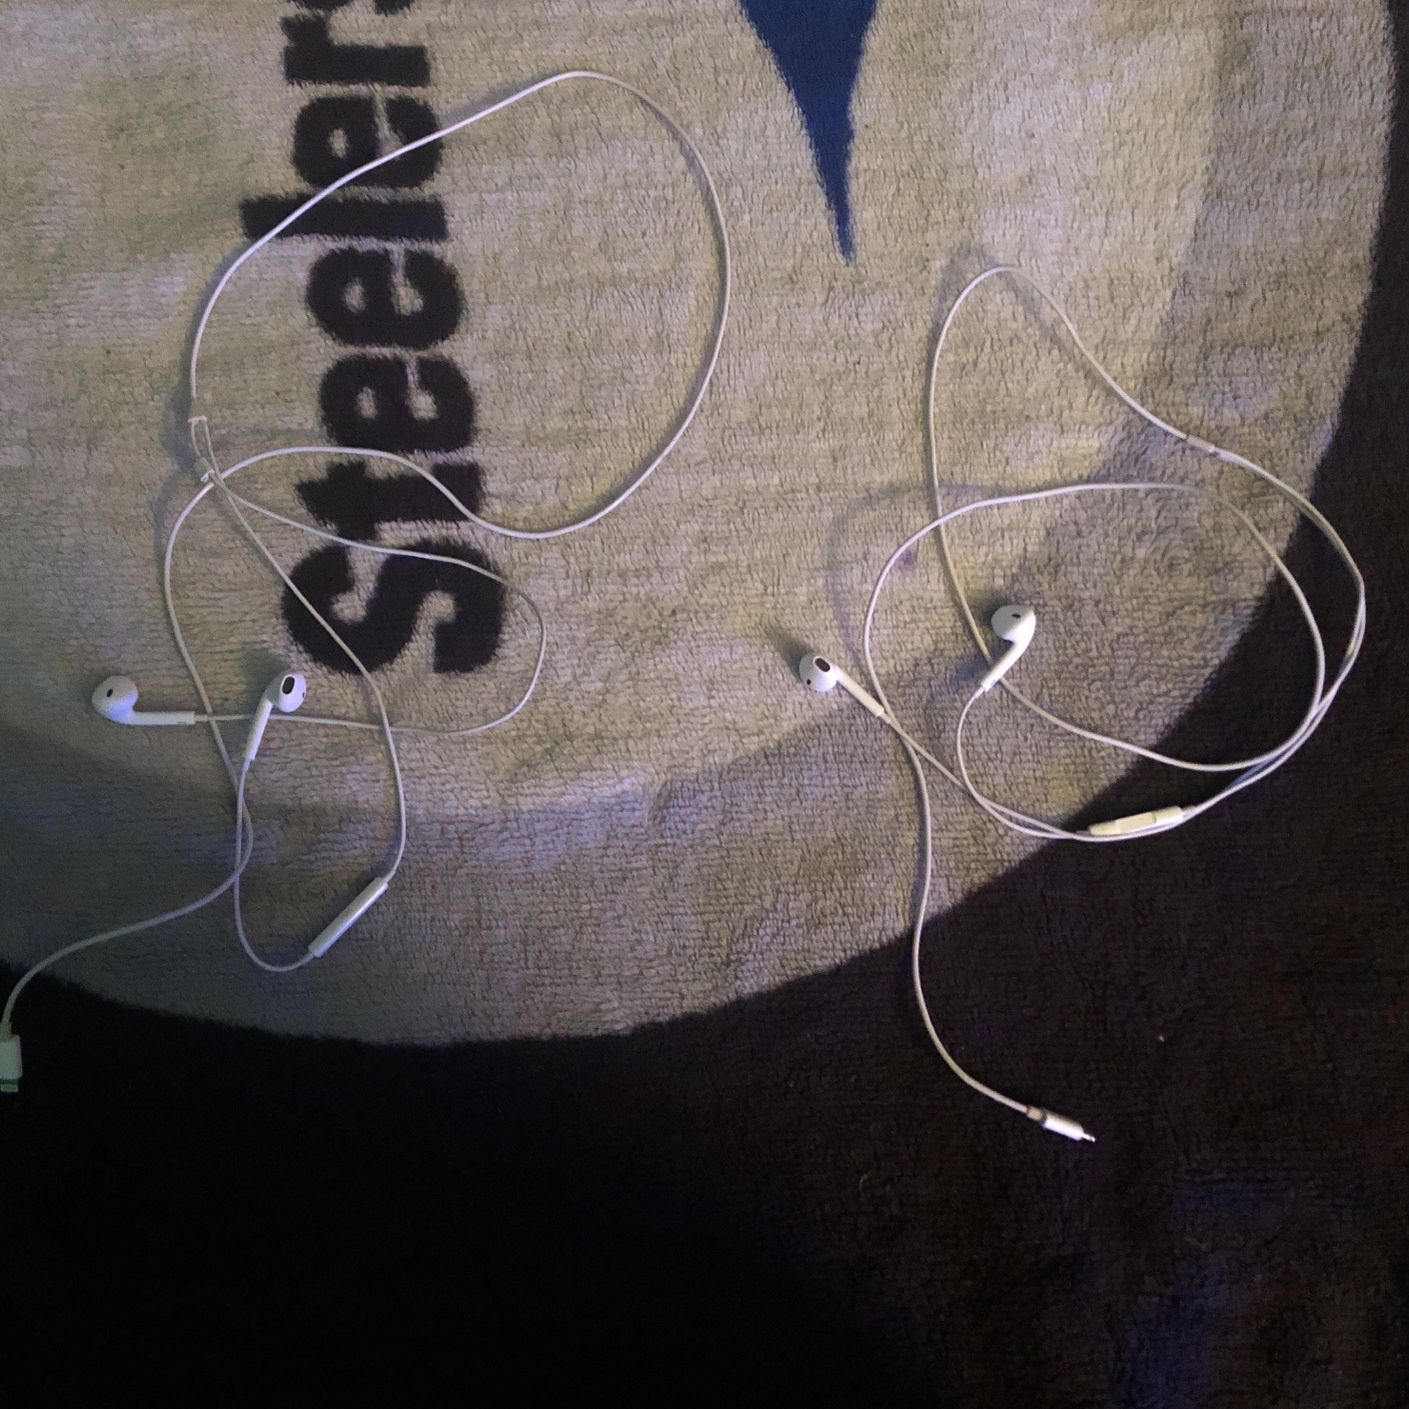 Wired Pods Clean/Perfect Condition